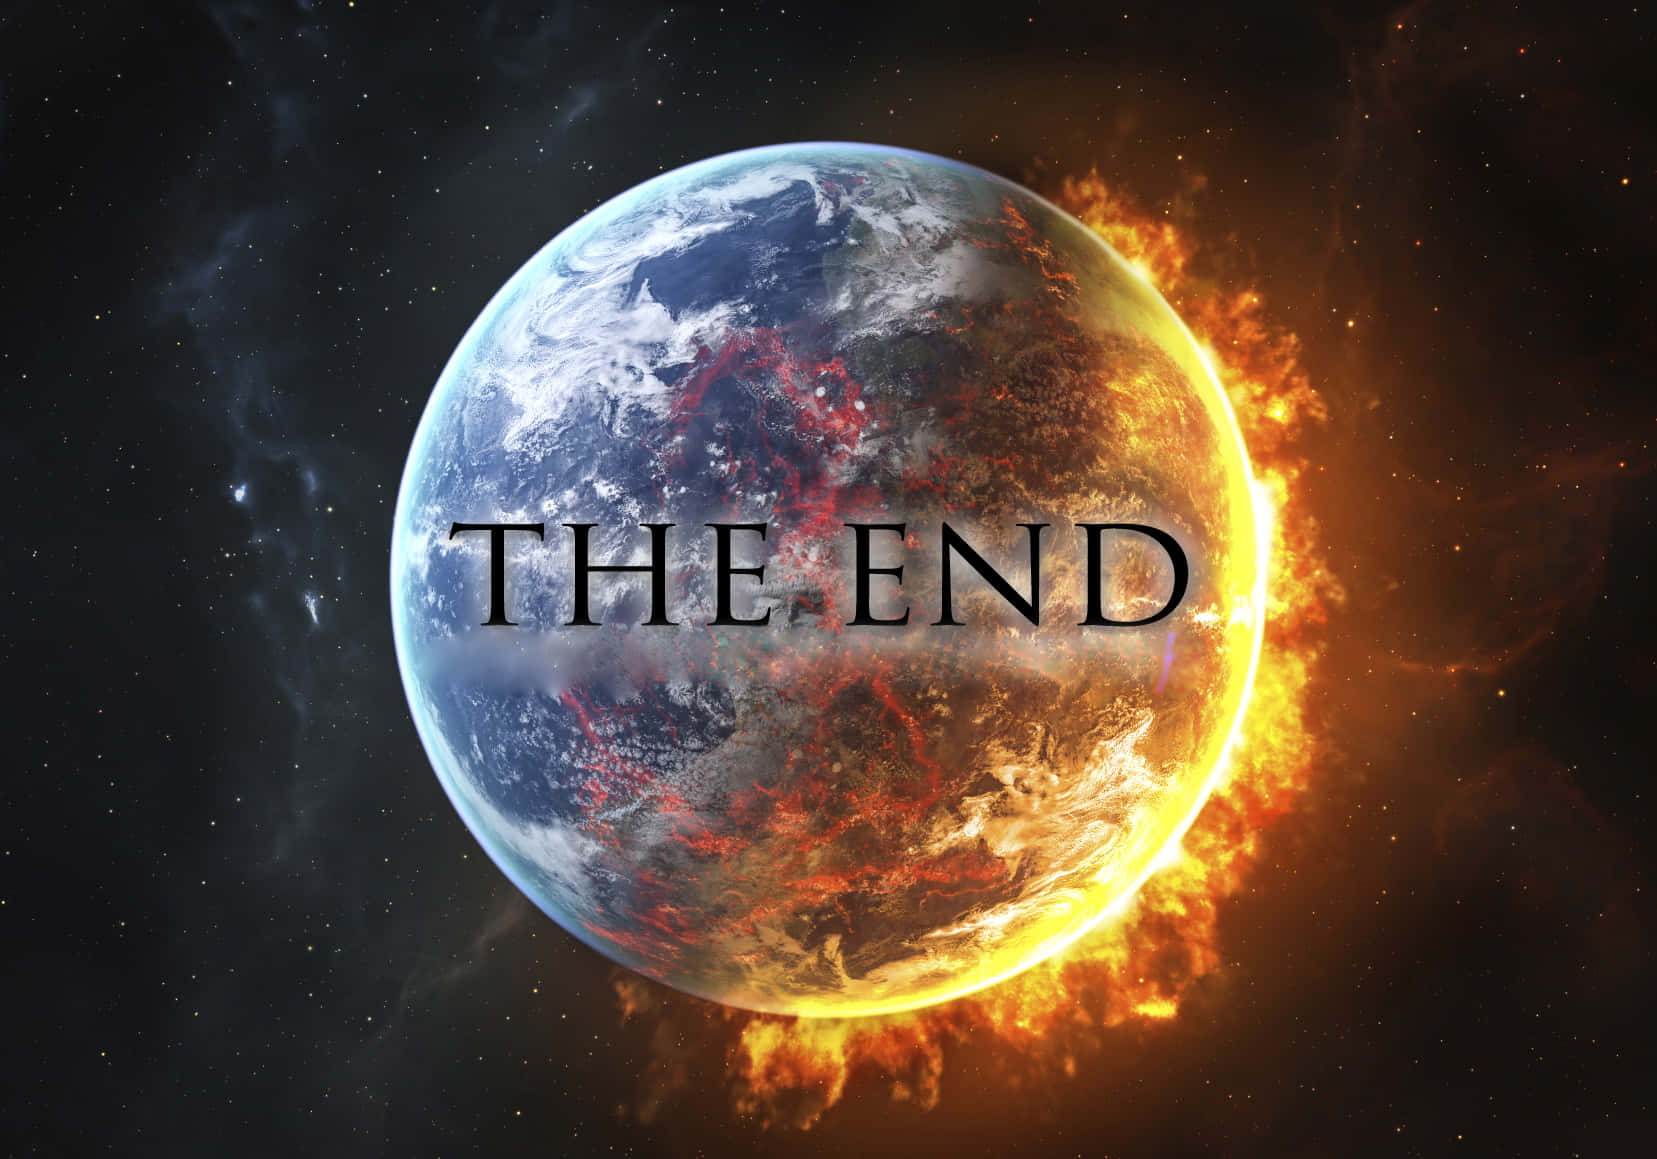 "The End IsA Near" Wallpaper